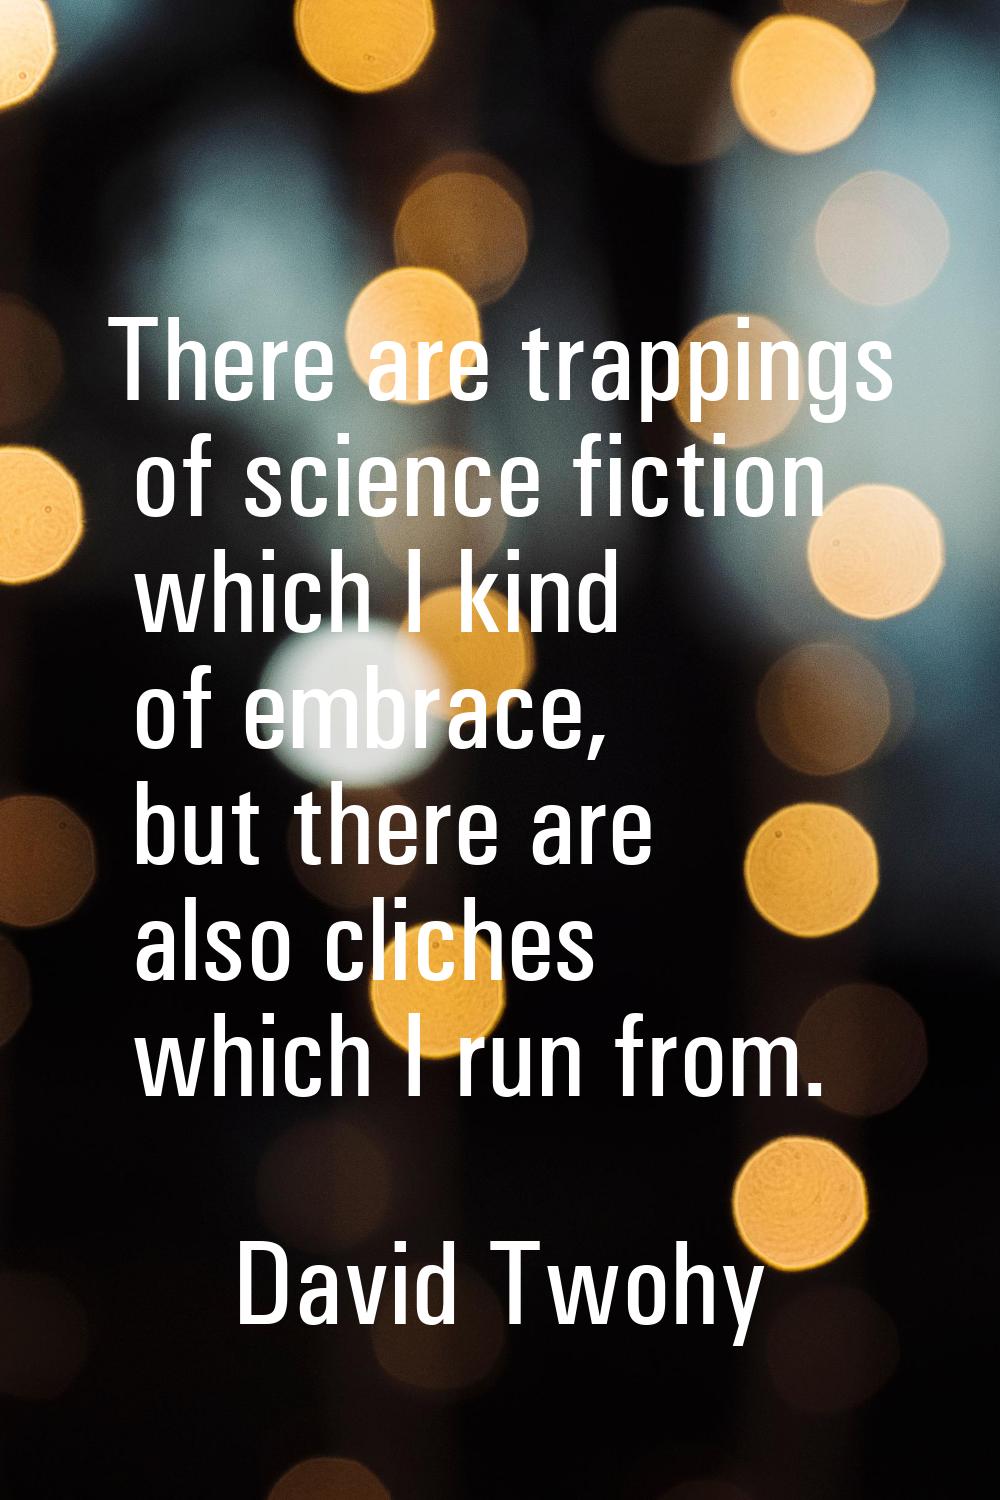 There are trappings of science fiction which I kind of embrace, but there are also cliches which I 